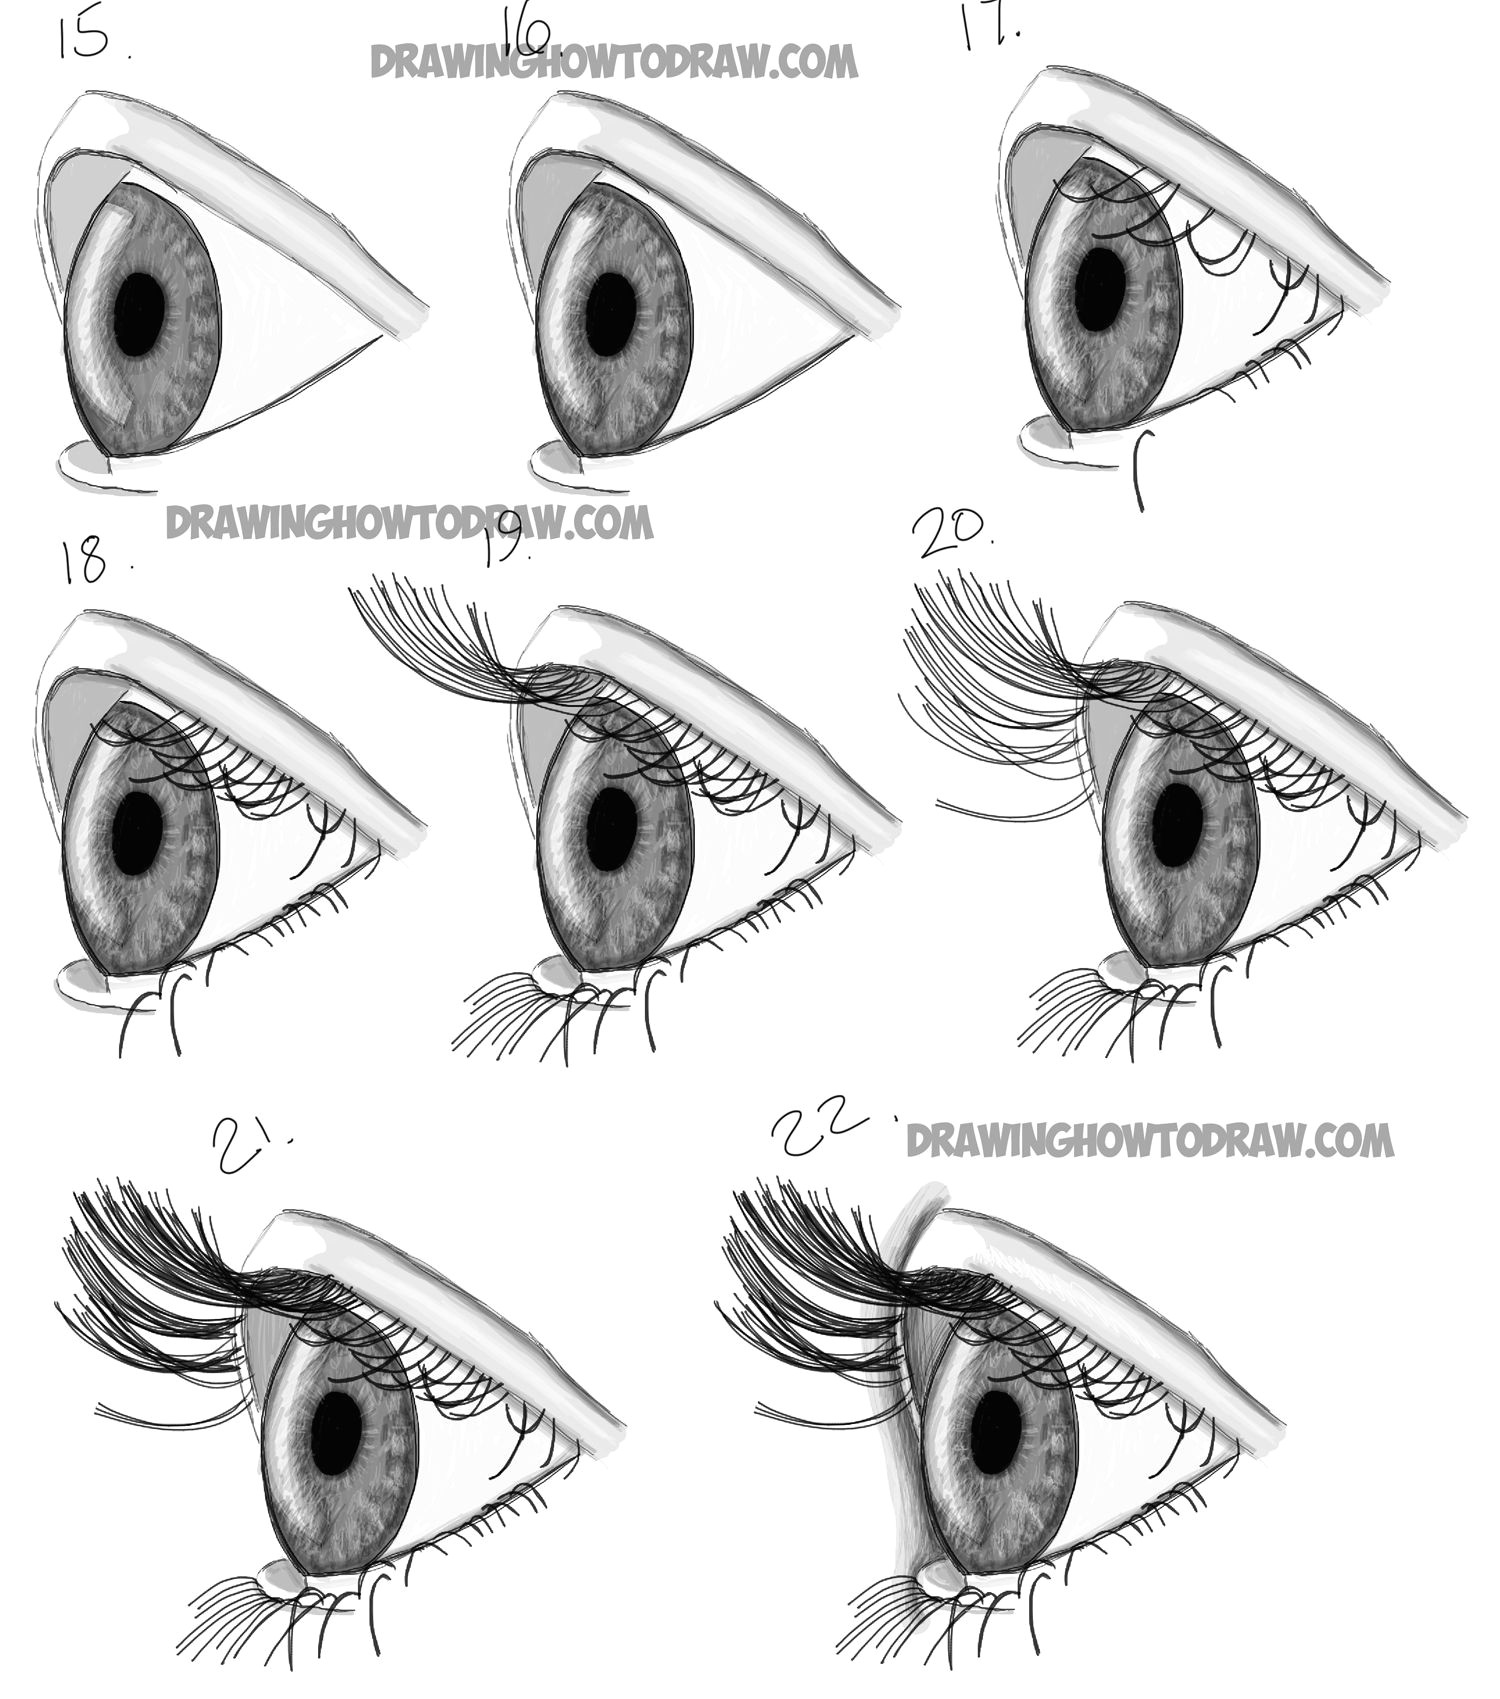 Drawing Eyes Perspective How to Draw Realistic Eyes From the Side Profile View Step by Step